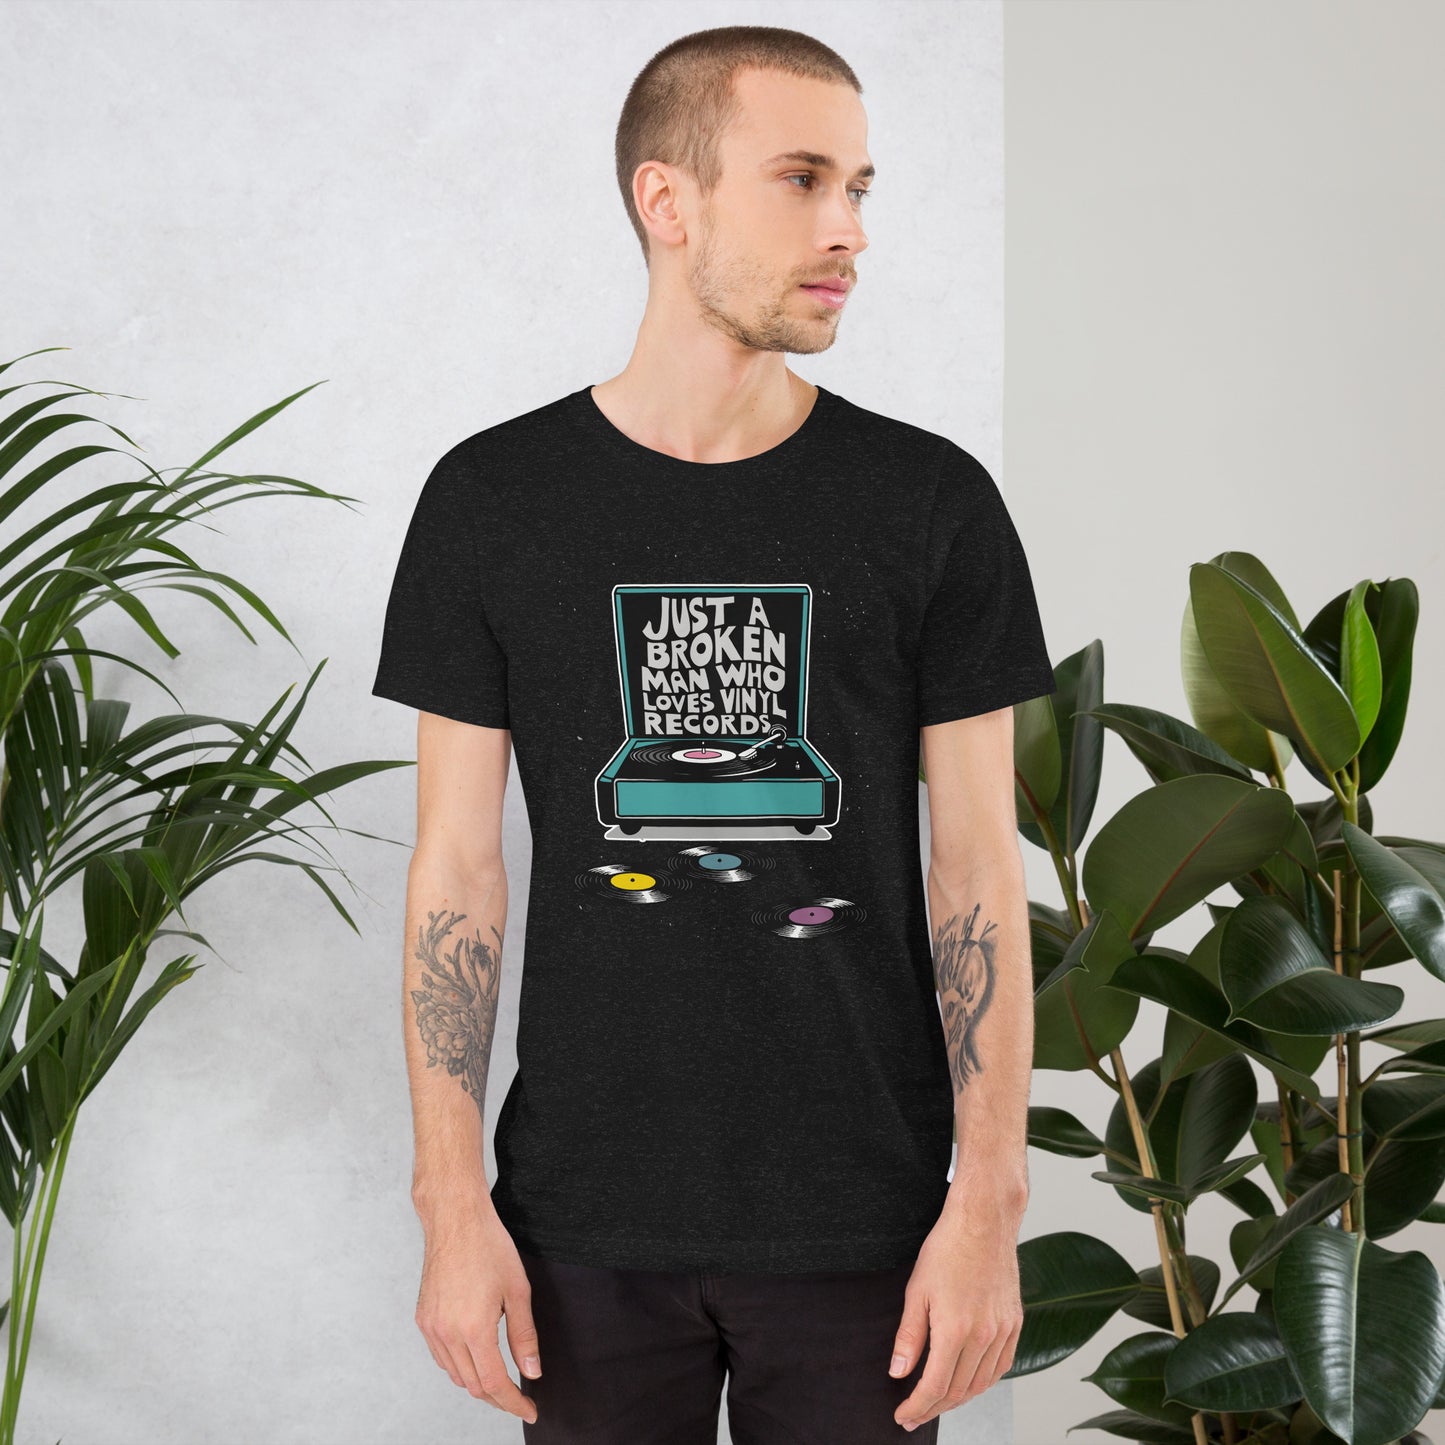 Just a Broken Man Who Loves Vinyl Records Tshirt [FOR THE ONE WHO SPENDS ALL THE MONEY ON RECORDS]